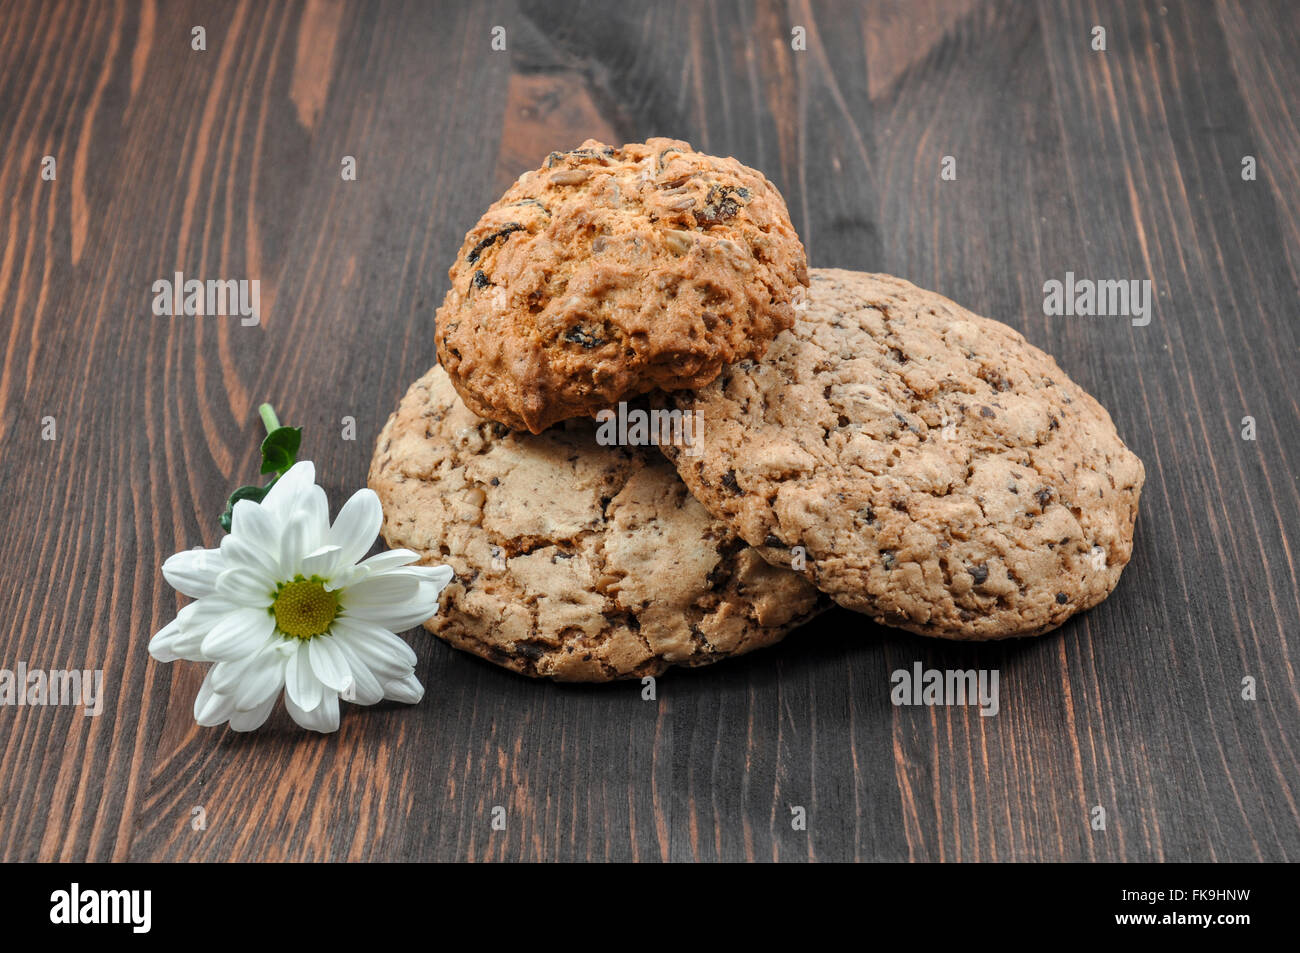 two chocolate cookies with a flower on a wooden background Stock Photo